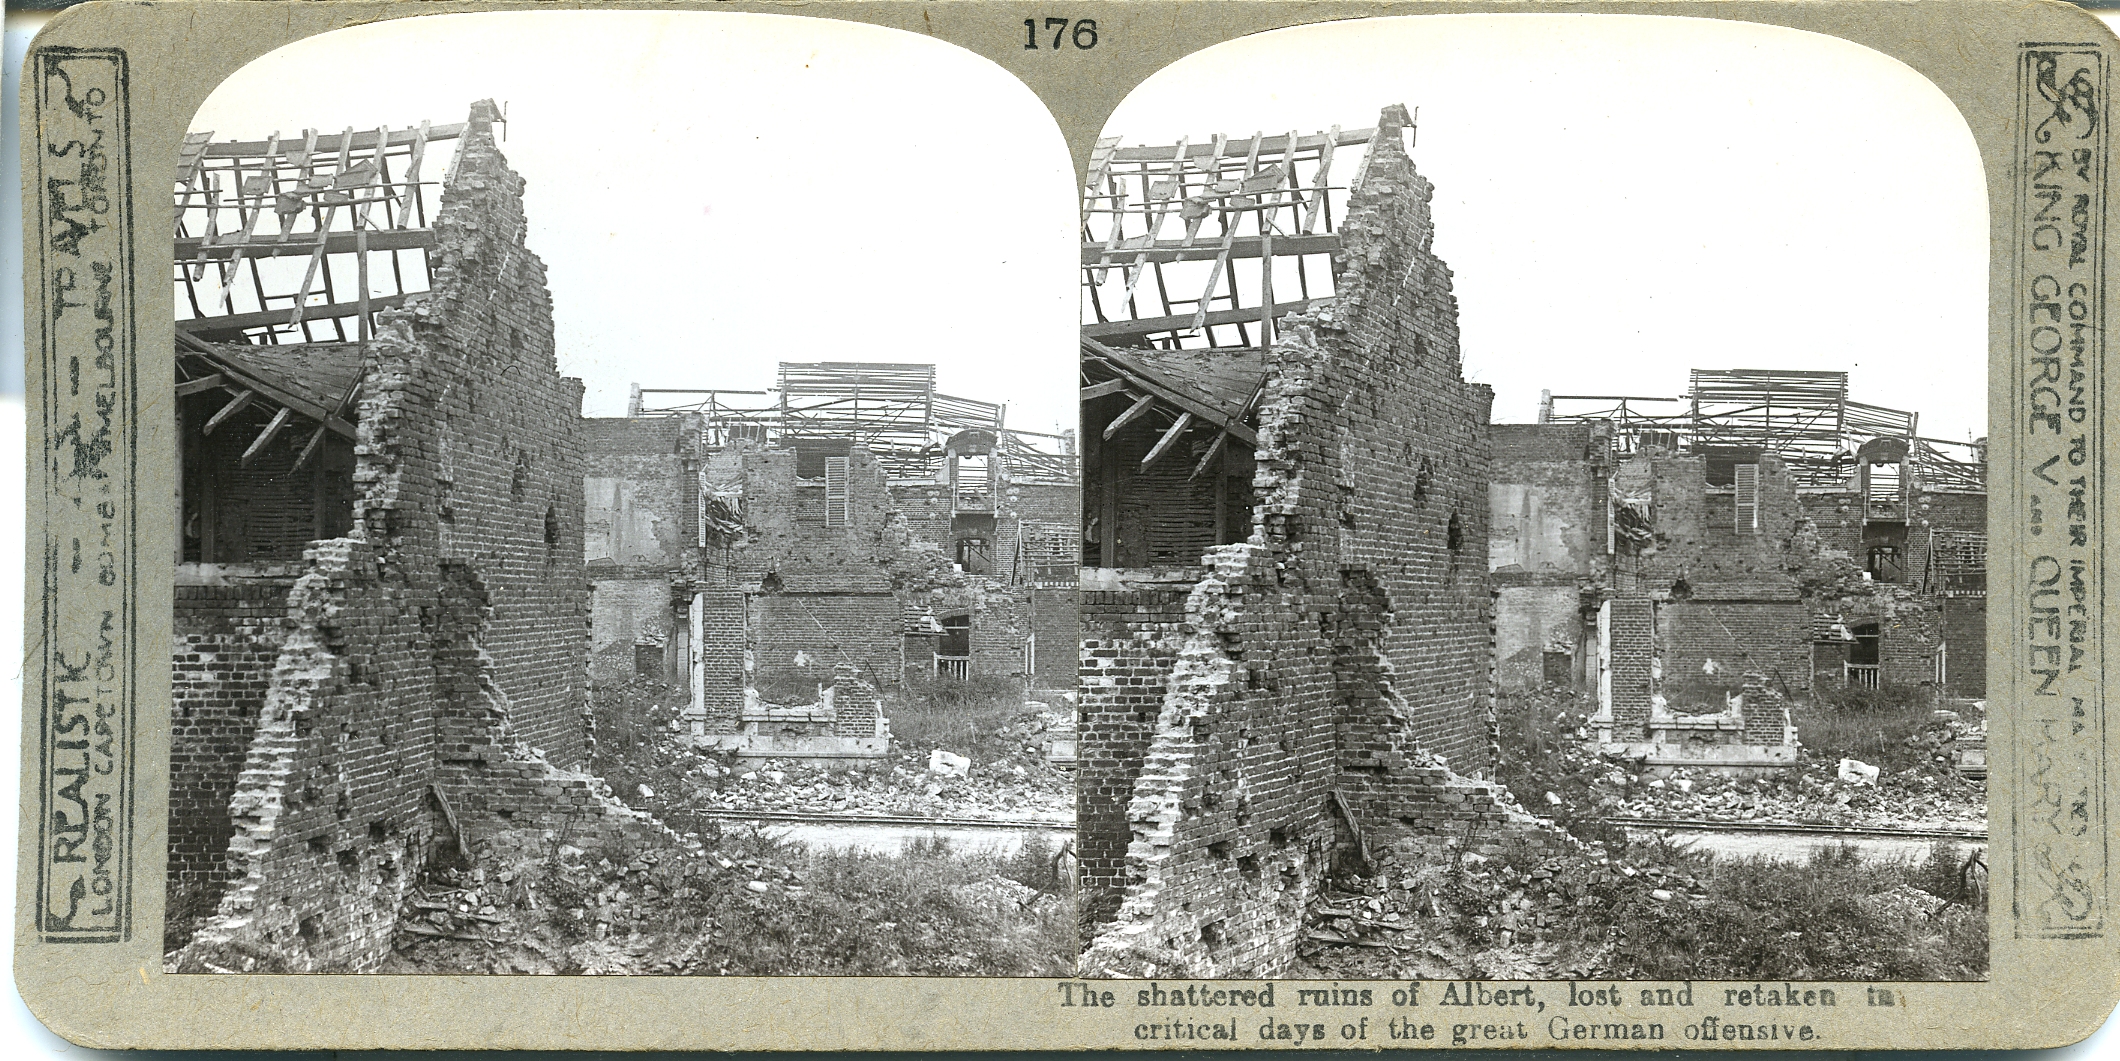 The shattered ruins of Albert, lost and retaken in critical days of the great German offensive